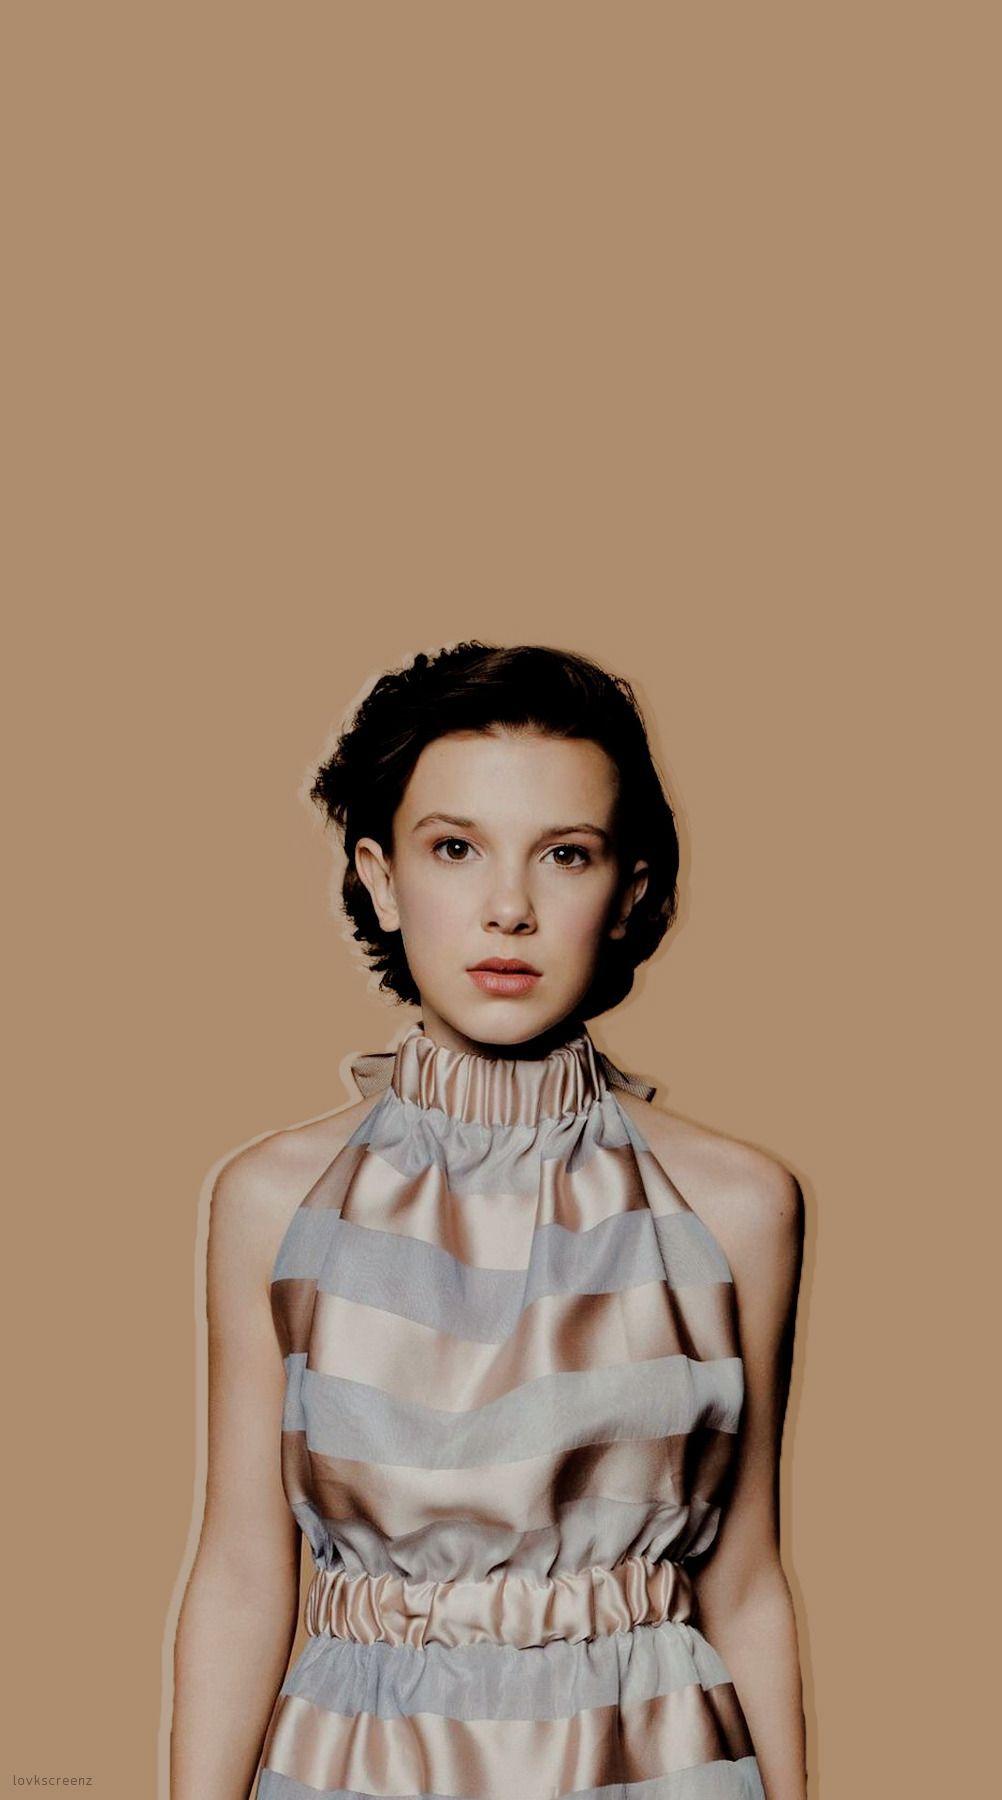 Millie Bobby Brown Stranger Things Wallpapers - Top Free Millie Bobby ...